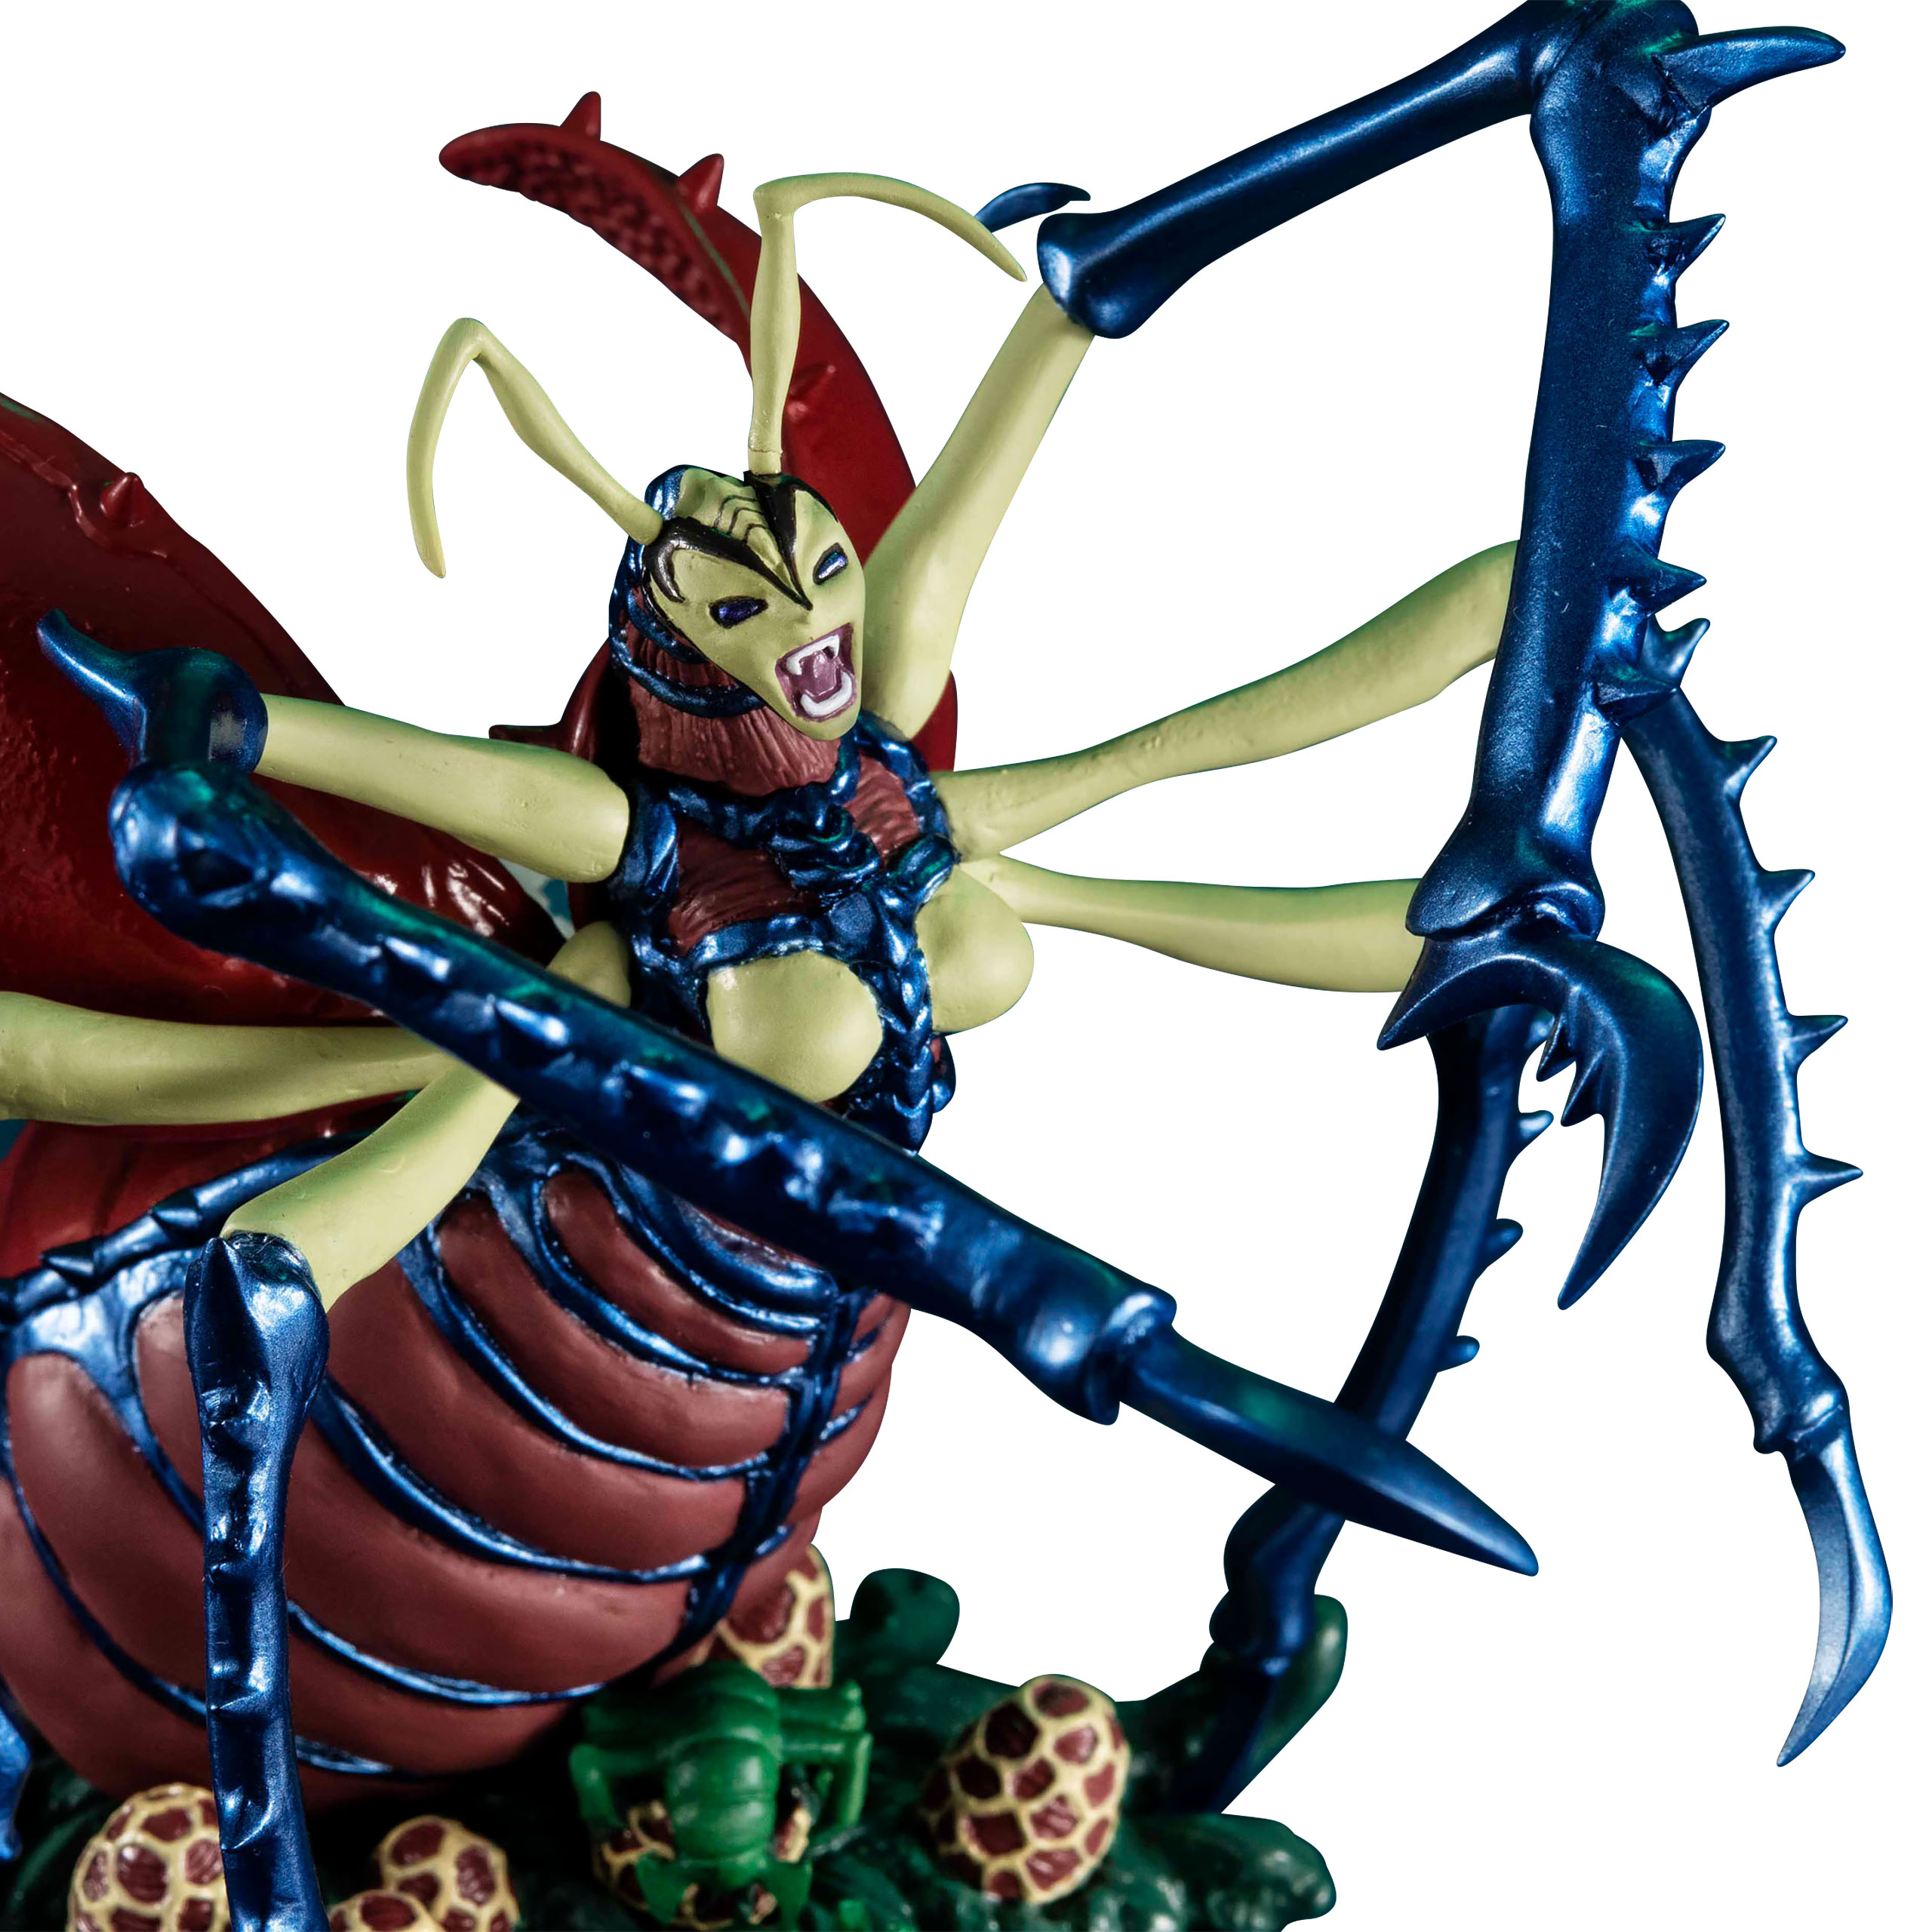 Yu-Gi-Oh! - Insect Queen Duel Monsters Statue